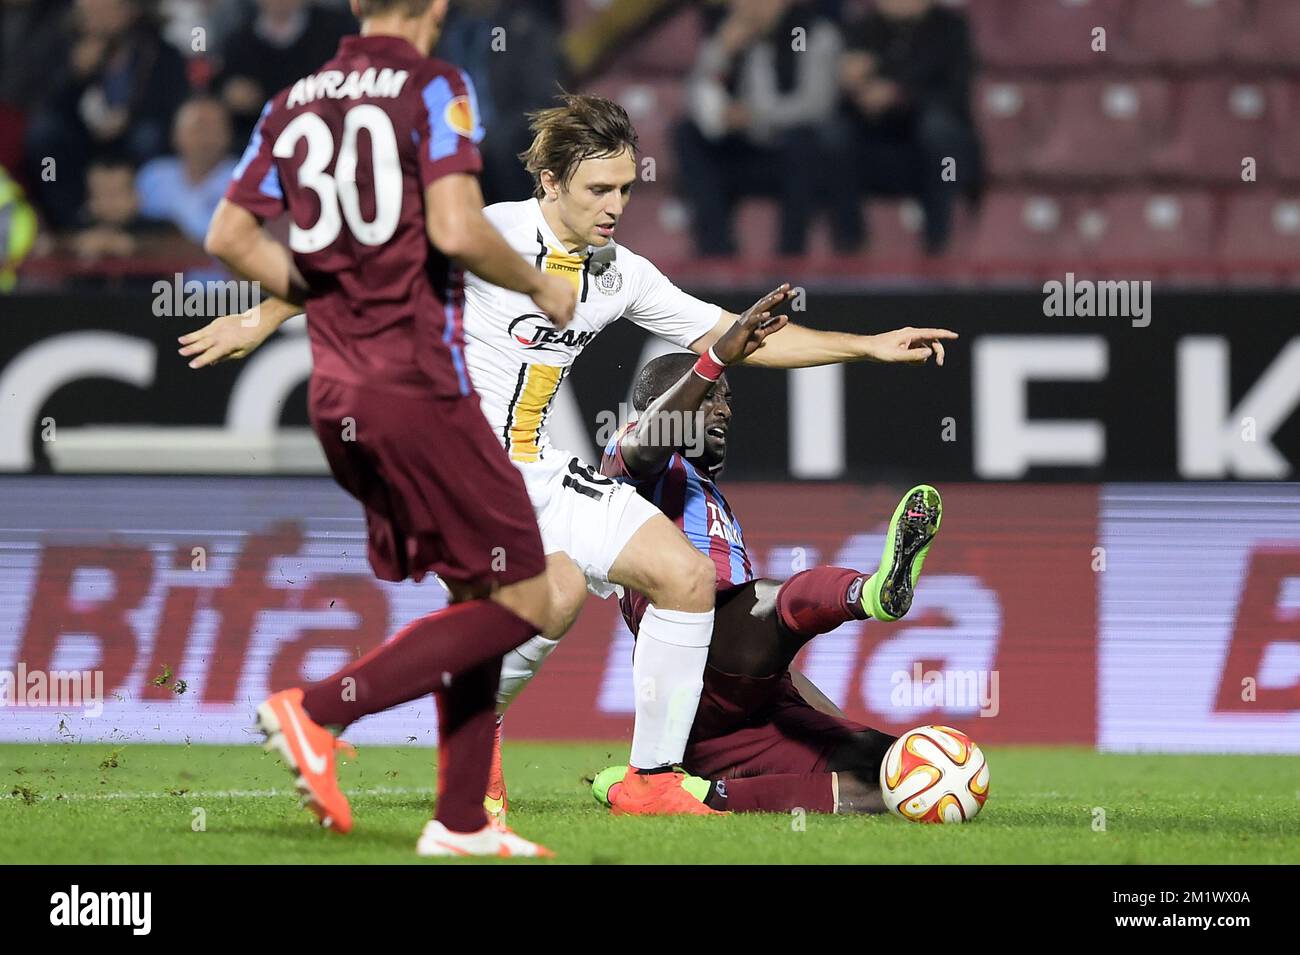 20141023 - TRABZON, TURKEY: Lokeren's Besart Abdurahimi and Trabzonspor's Ishak Dogan fight for the ball during a game between Turkish club Trabzonspor AS and Belgian soccer team KSC Lokeren OVL in the Huseyin Avni Aker Stadium in Trabzon, Thursday 23 October 2014. It is the third day of the group stage of the UEFA Europa League competition, in group L. BELGA PHOTO YORICK JANSENS Stock Photo